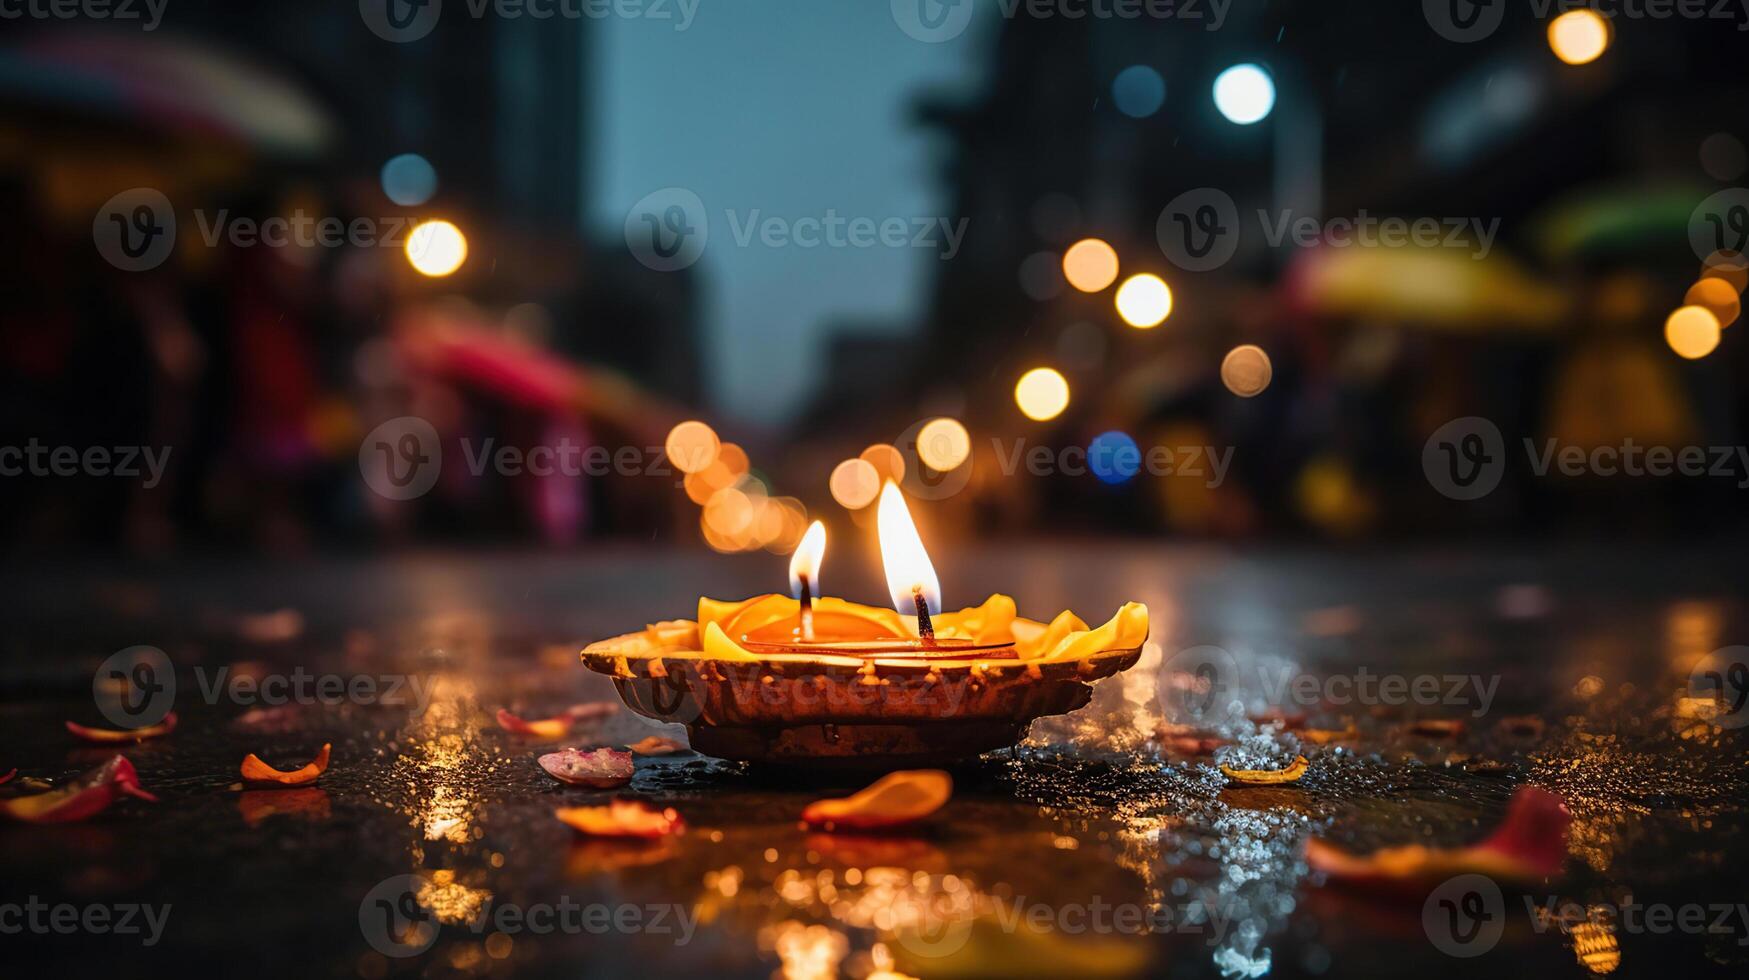 Candle light on Diwali or Deepawali festival in India, photo